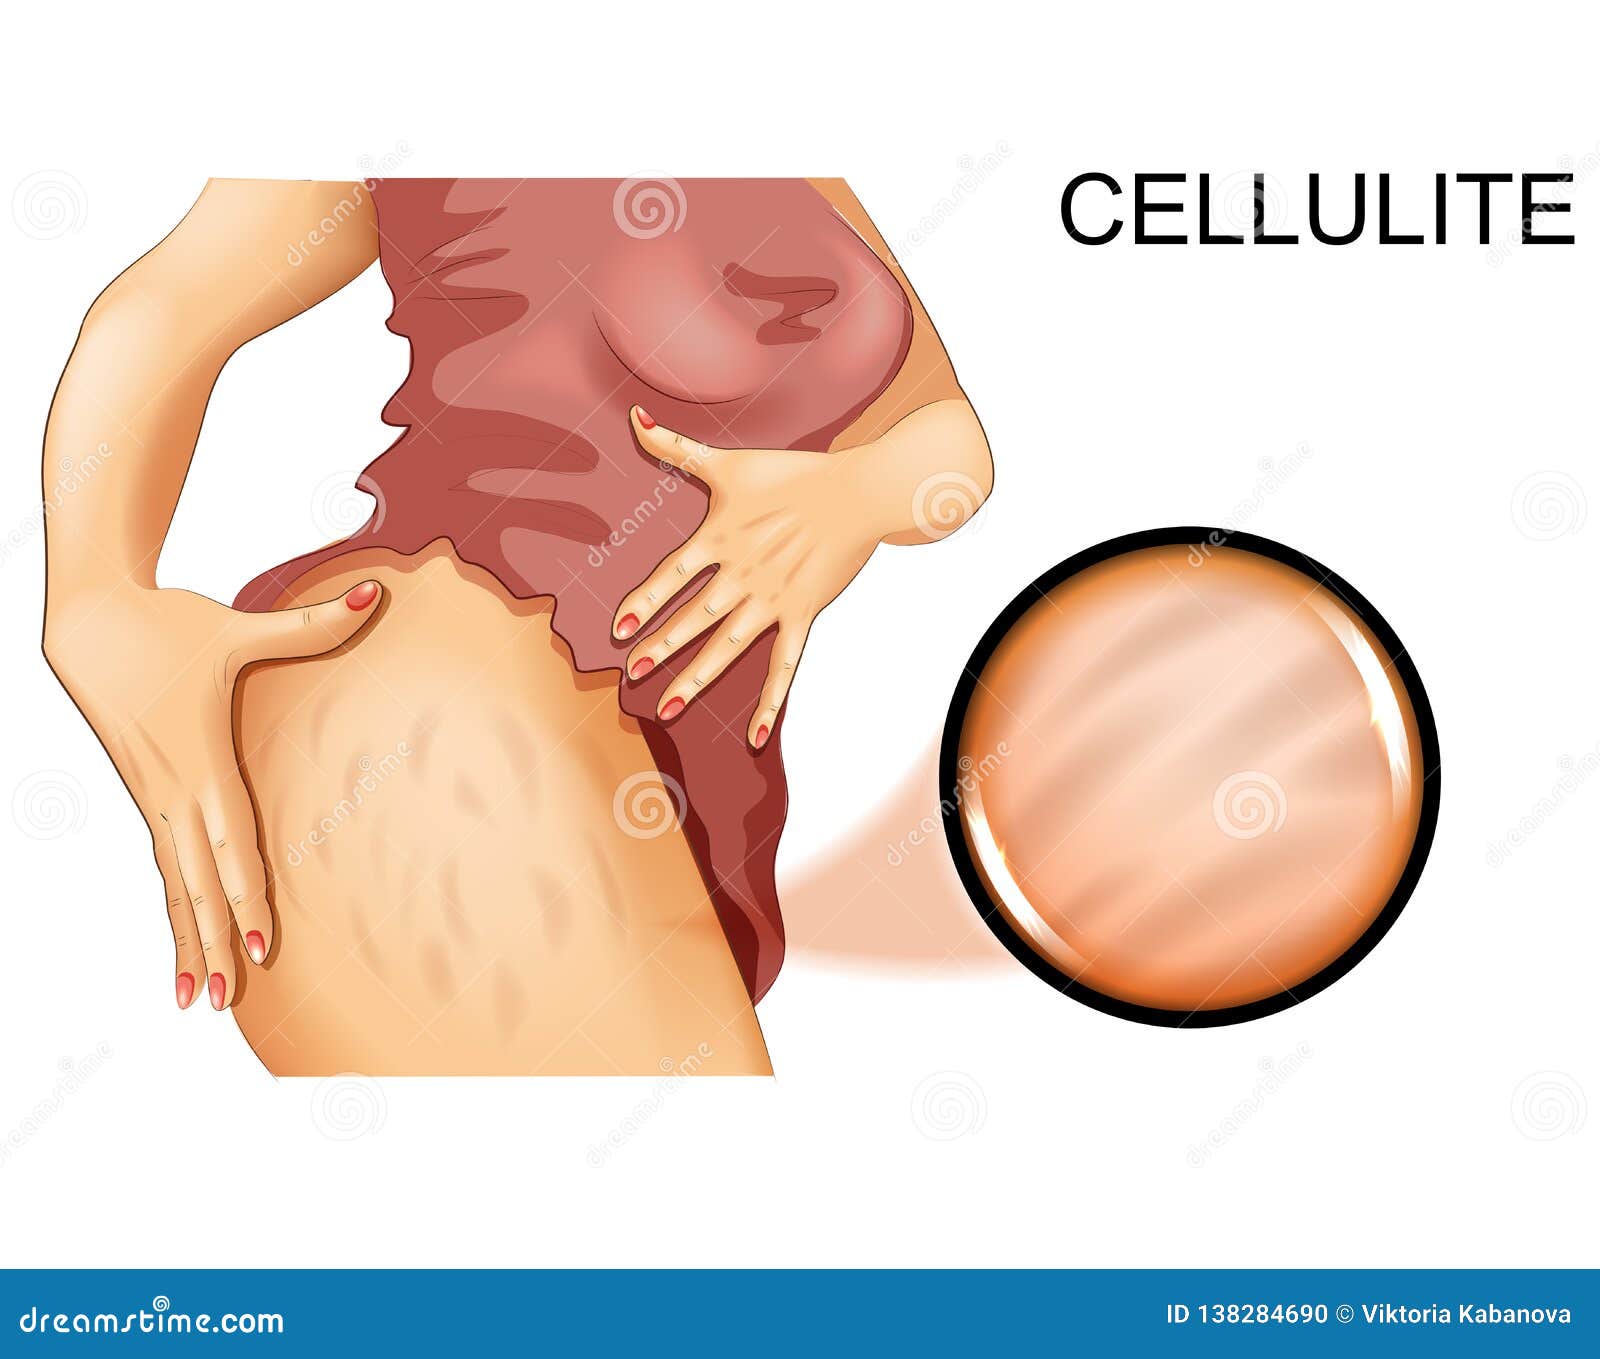 cellulite on a woman`s thigh